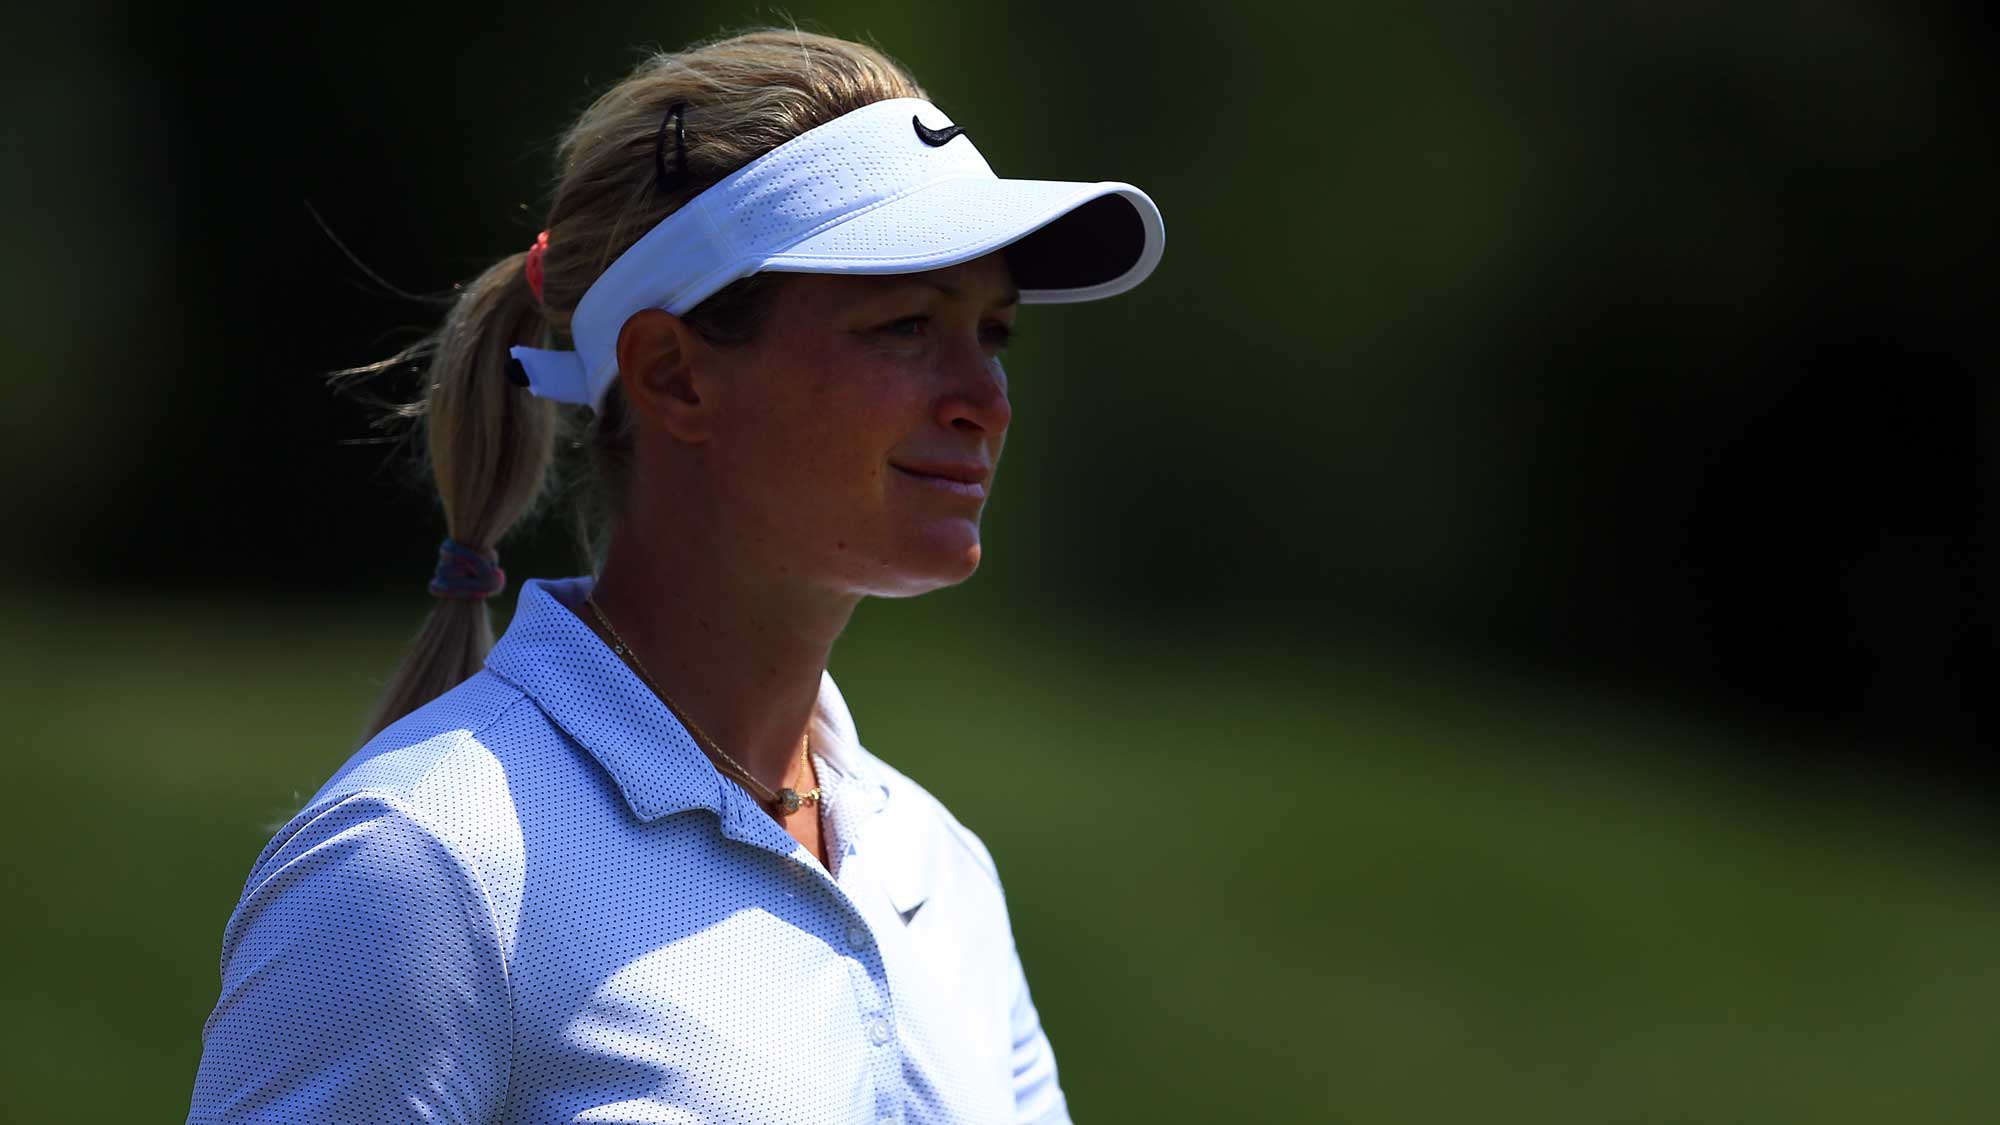 Suzann Pettersen of Norway walks down the 1st fairway during the third round of the Manulife LPGA Classic